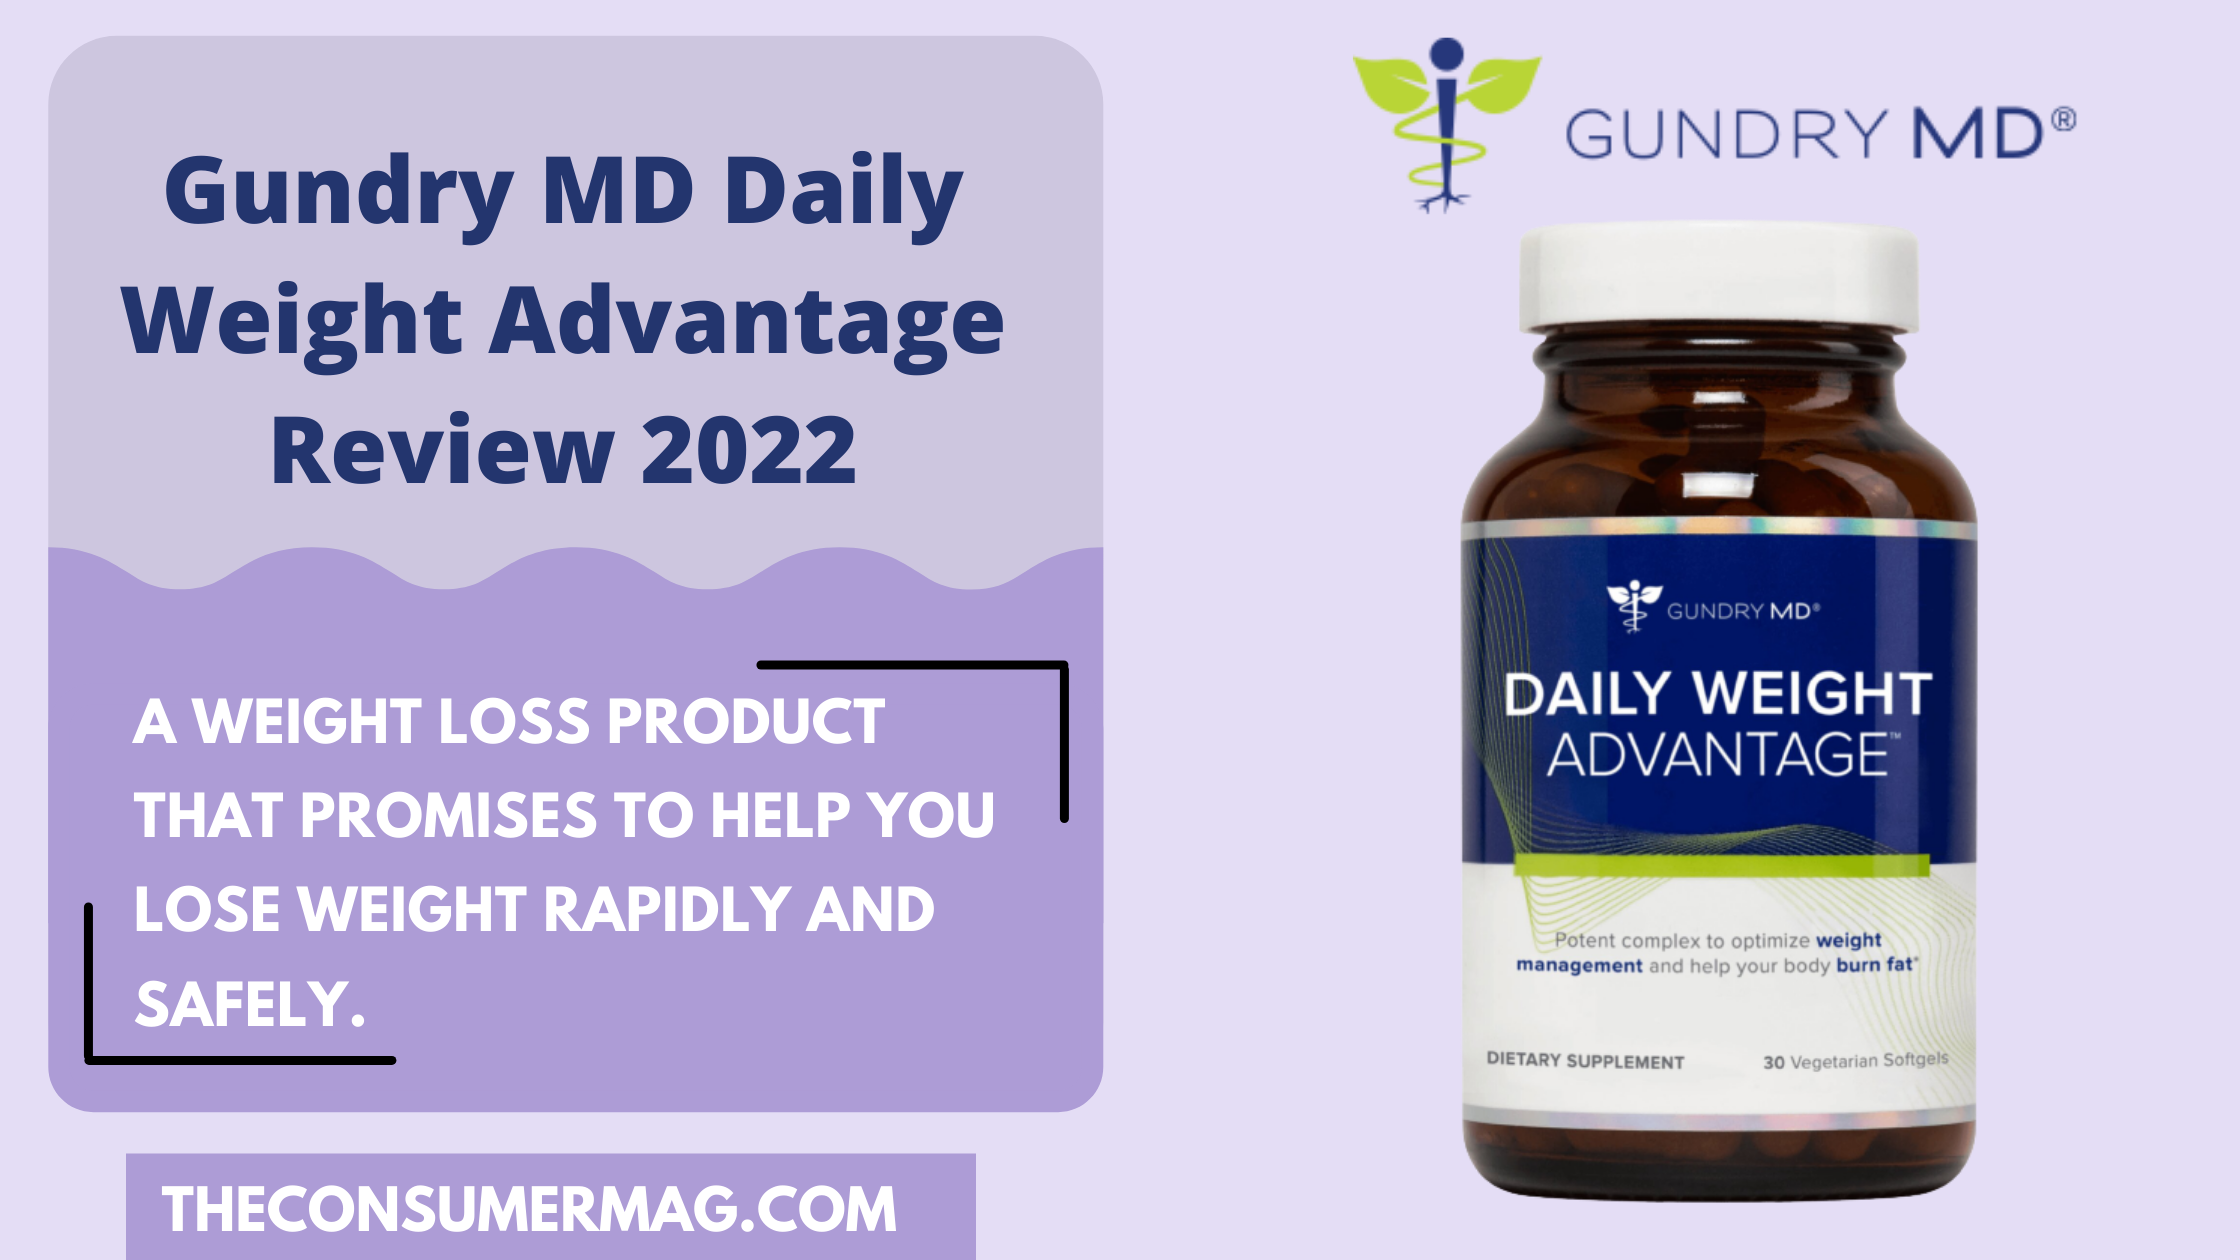 Gundry MD Daily Weight Advantage Featured Image